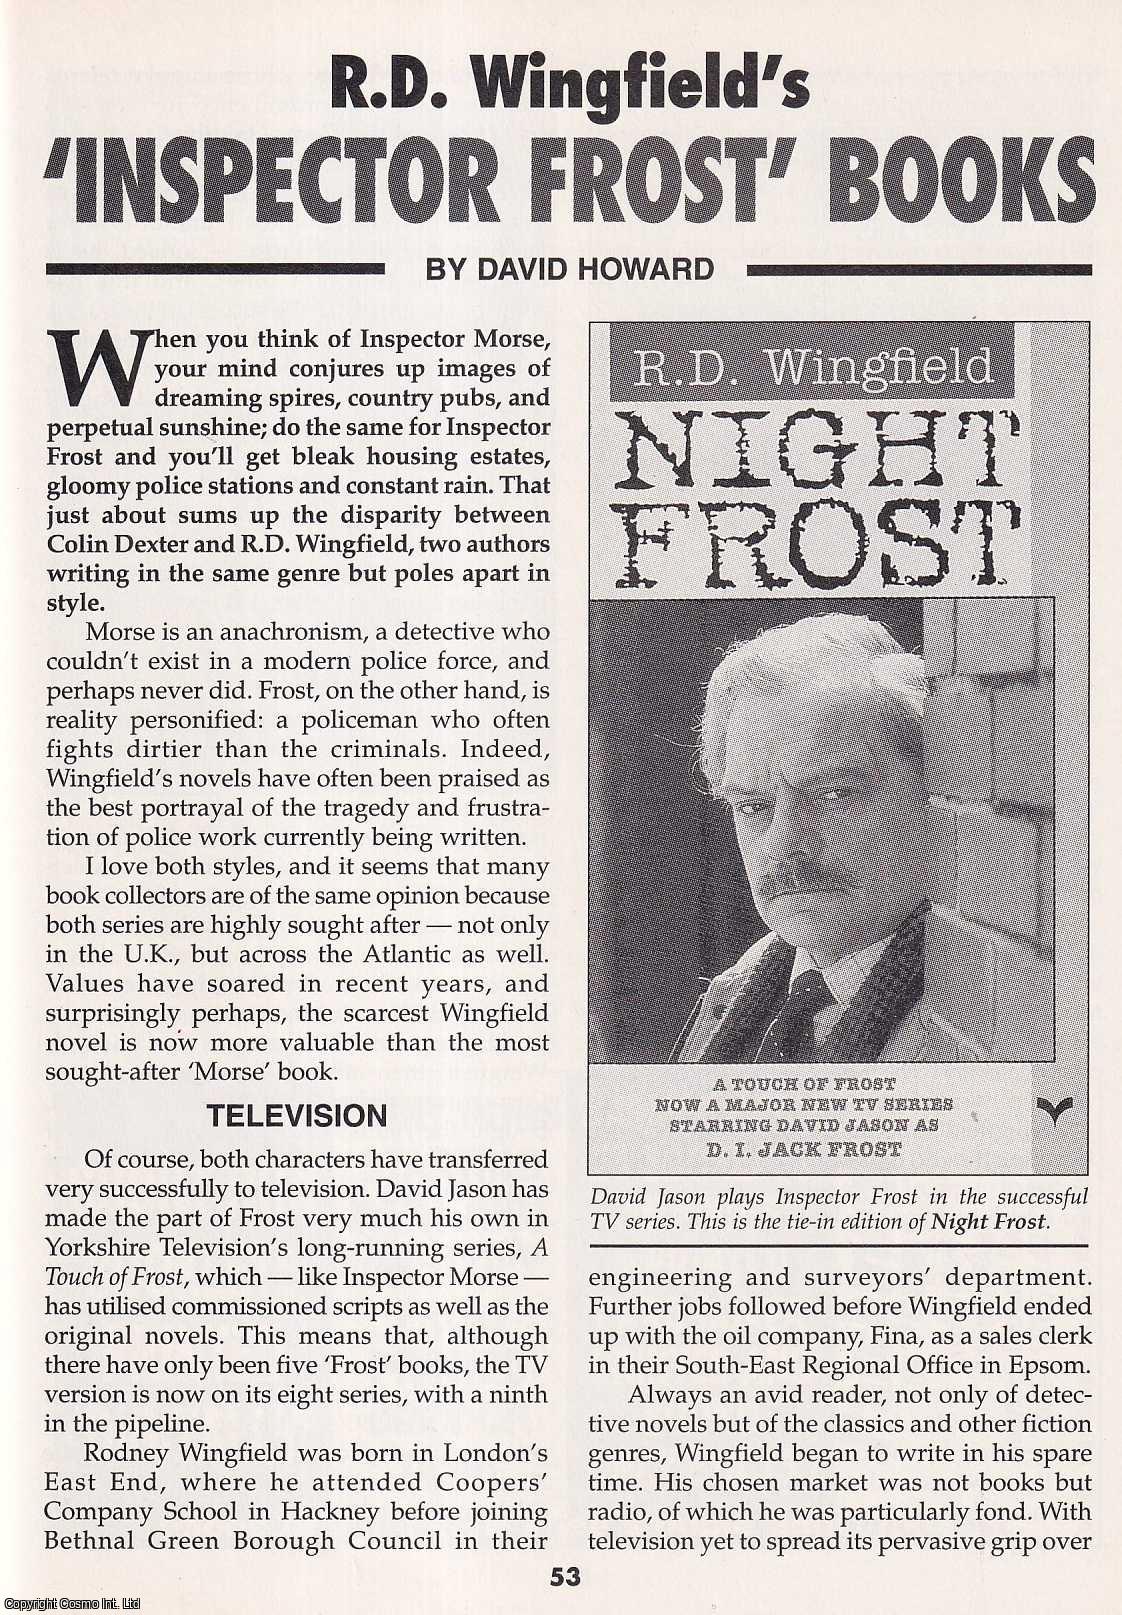 David Howard - R. D. Wingfield's Inspector Frost Books. This is an original article separated from an issue of The Book & Magazine Collector publication.